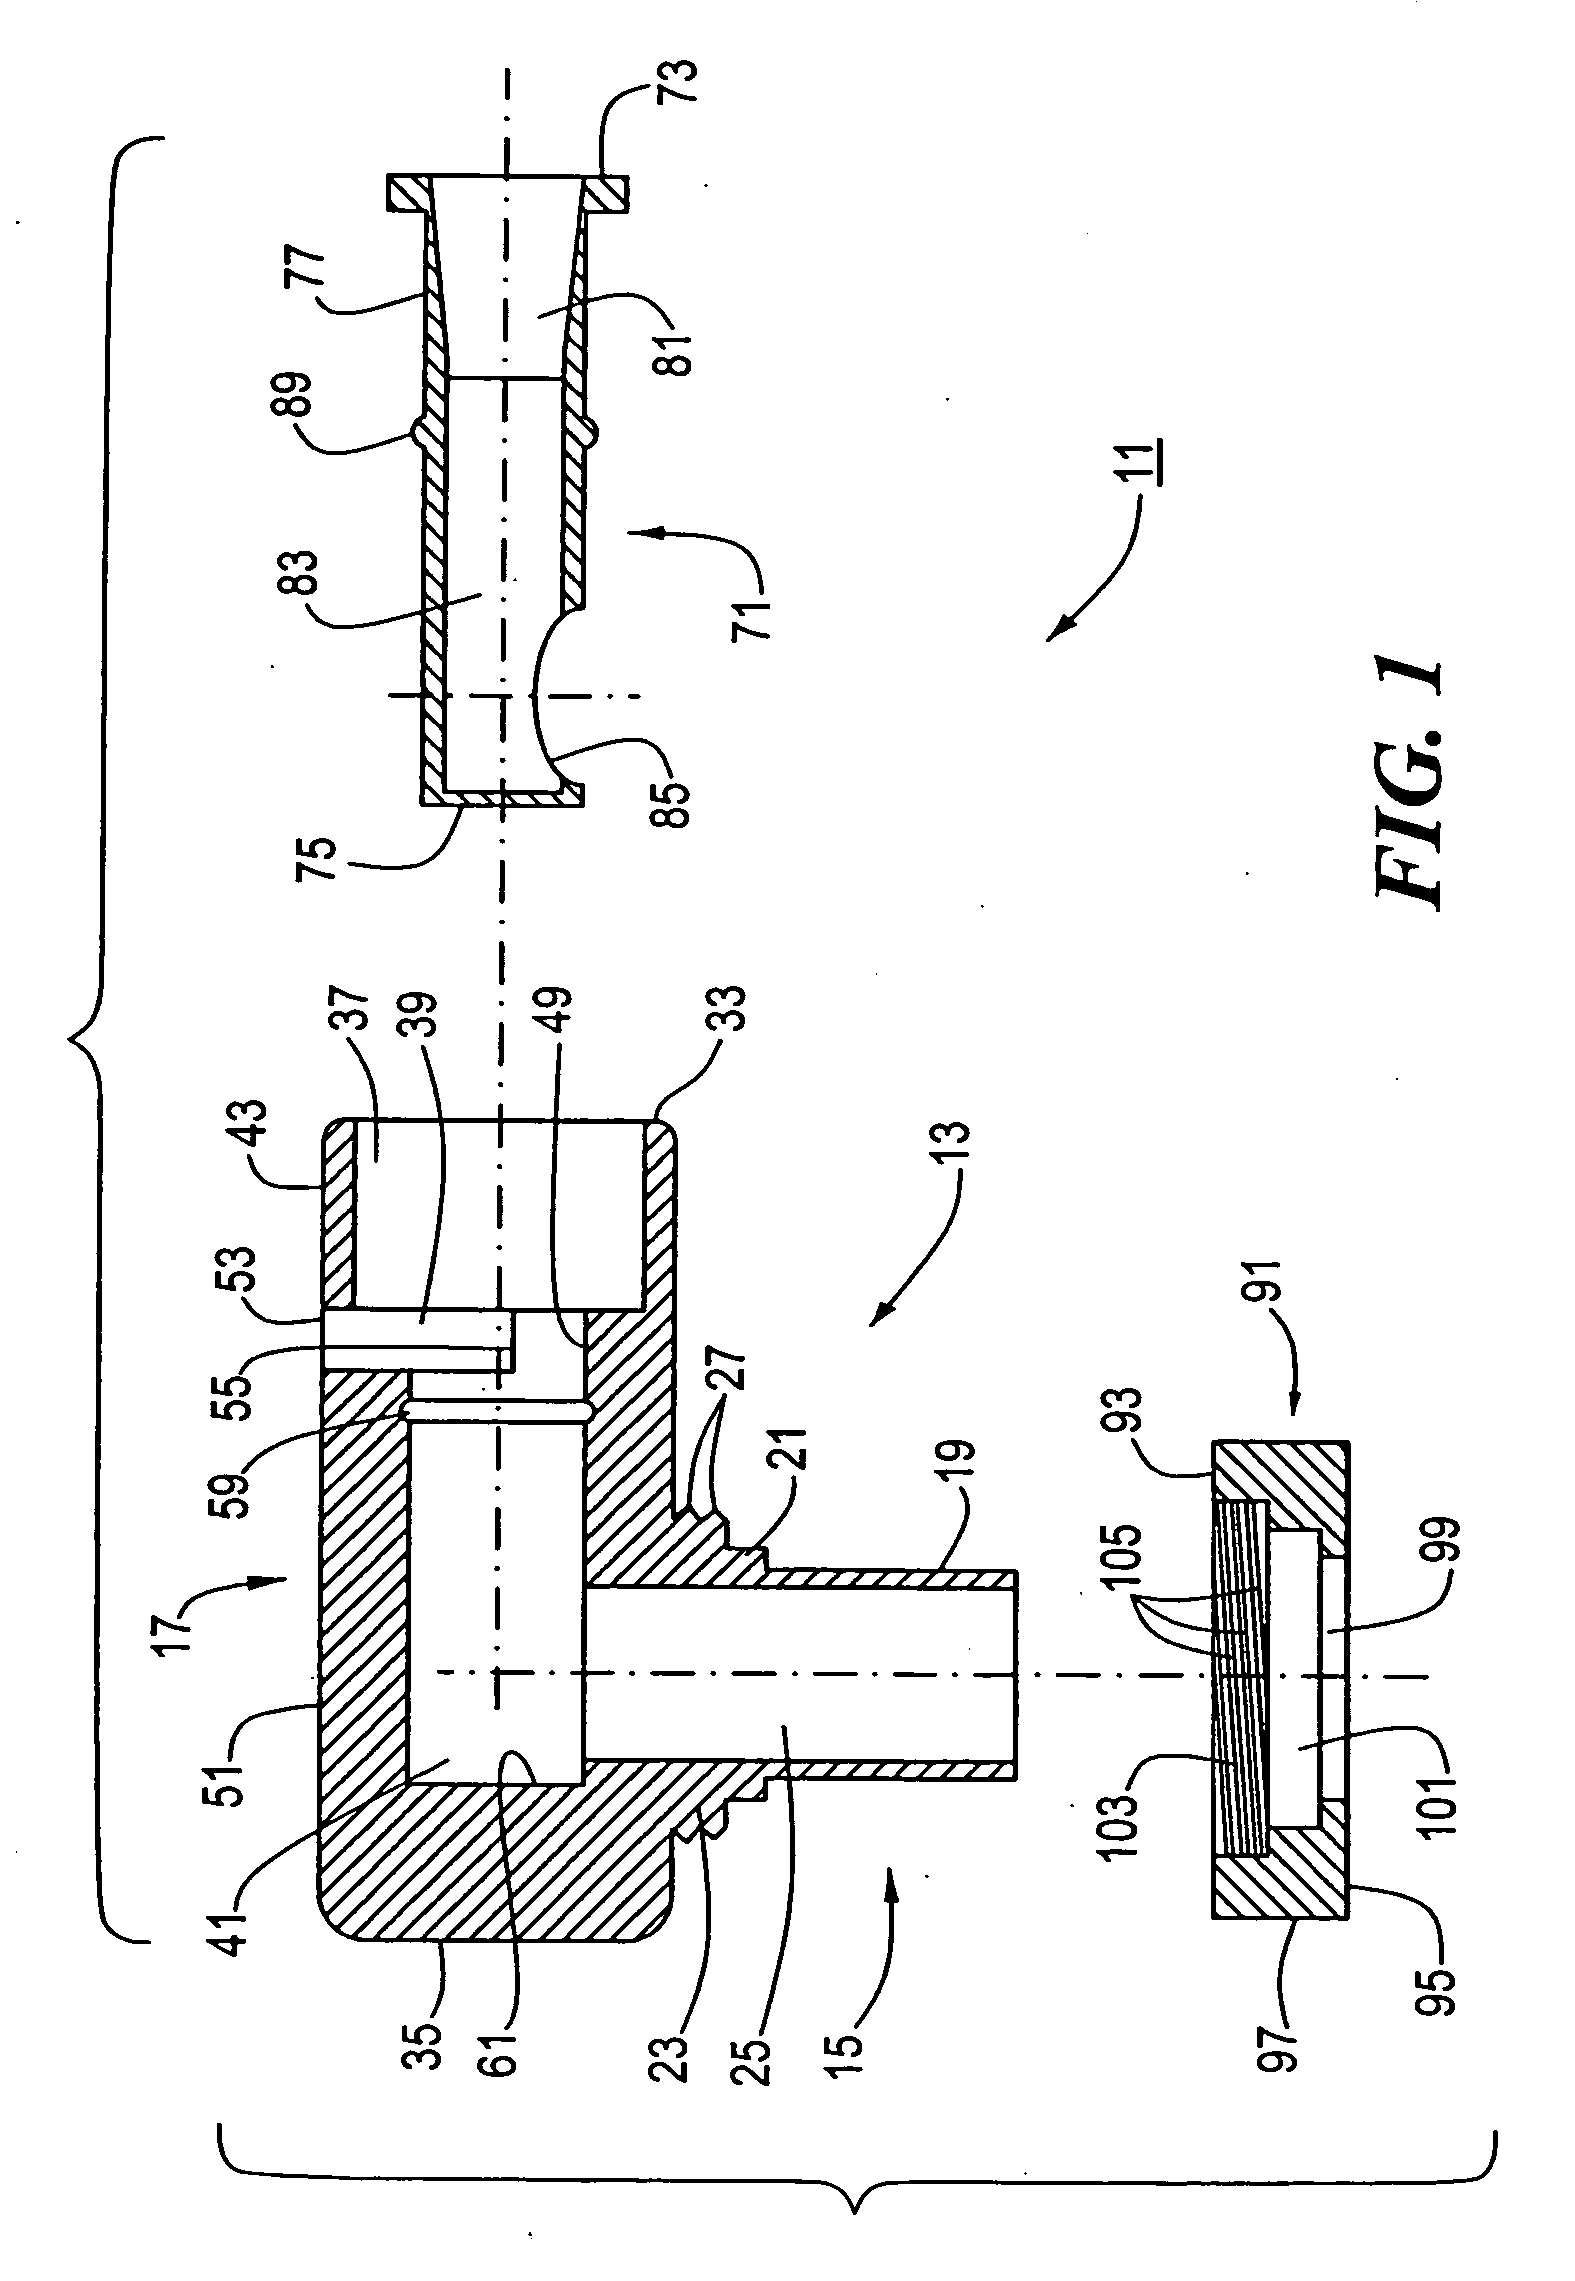 Low profile adaptor for use with a medical catheter